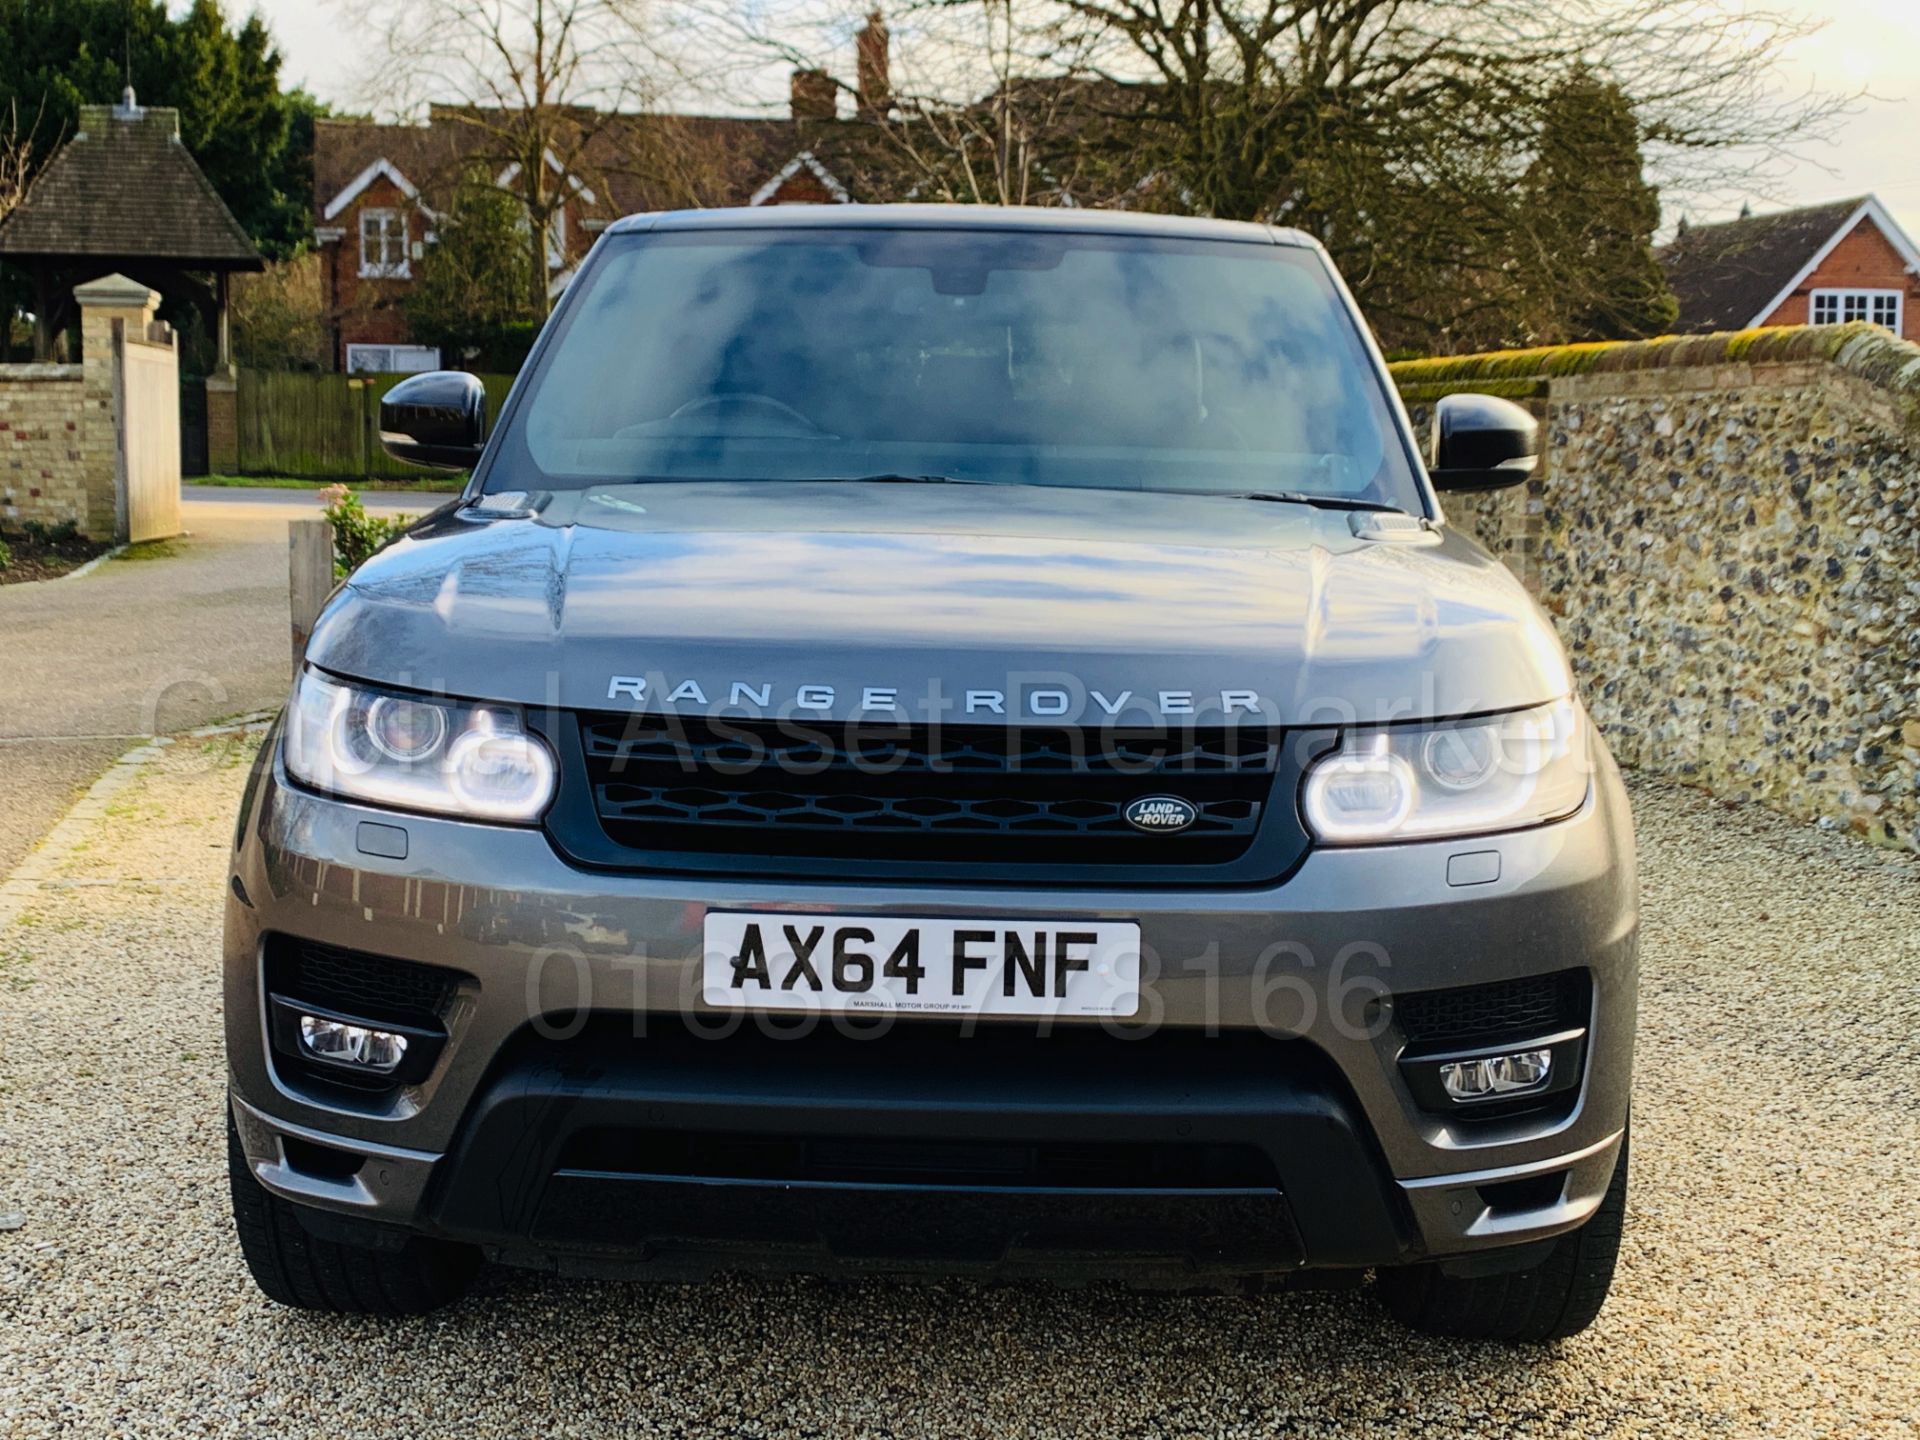 On Sale RANGE ROVER SPORT *AUTOBIOGRAPHY DYNAMIC* (2015 MODEL) '3.0 SDV6 - 8 SPEED AUTO' HIGE SPEC - Image 7 of 85